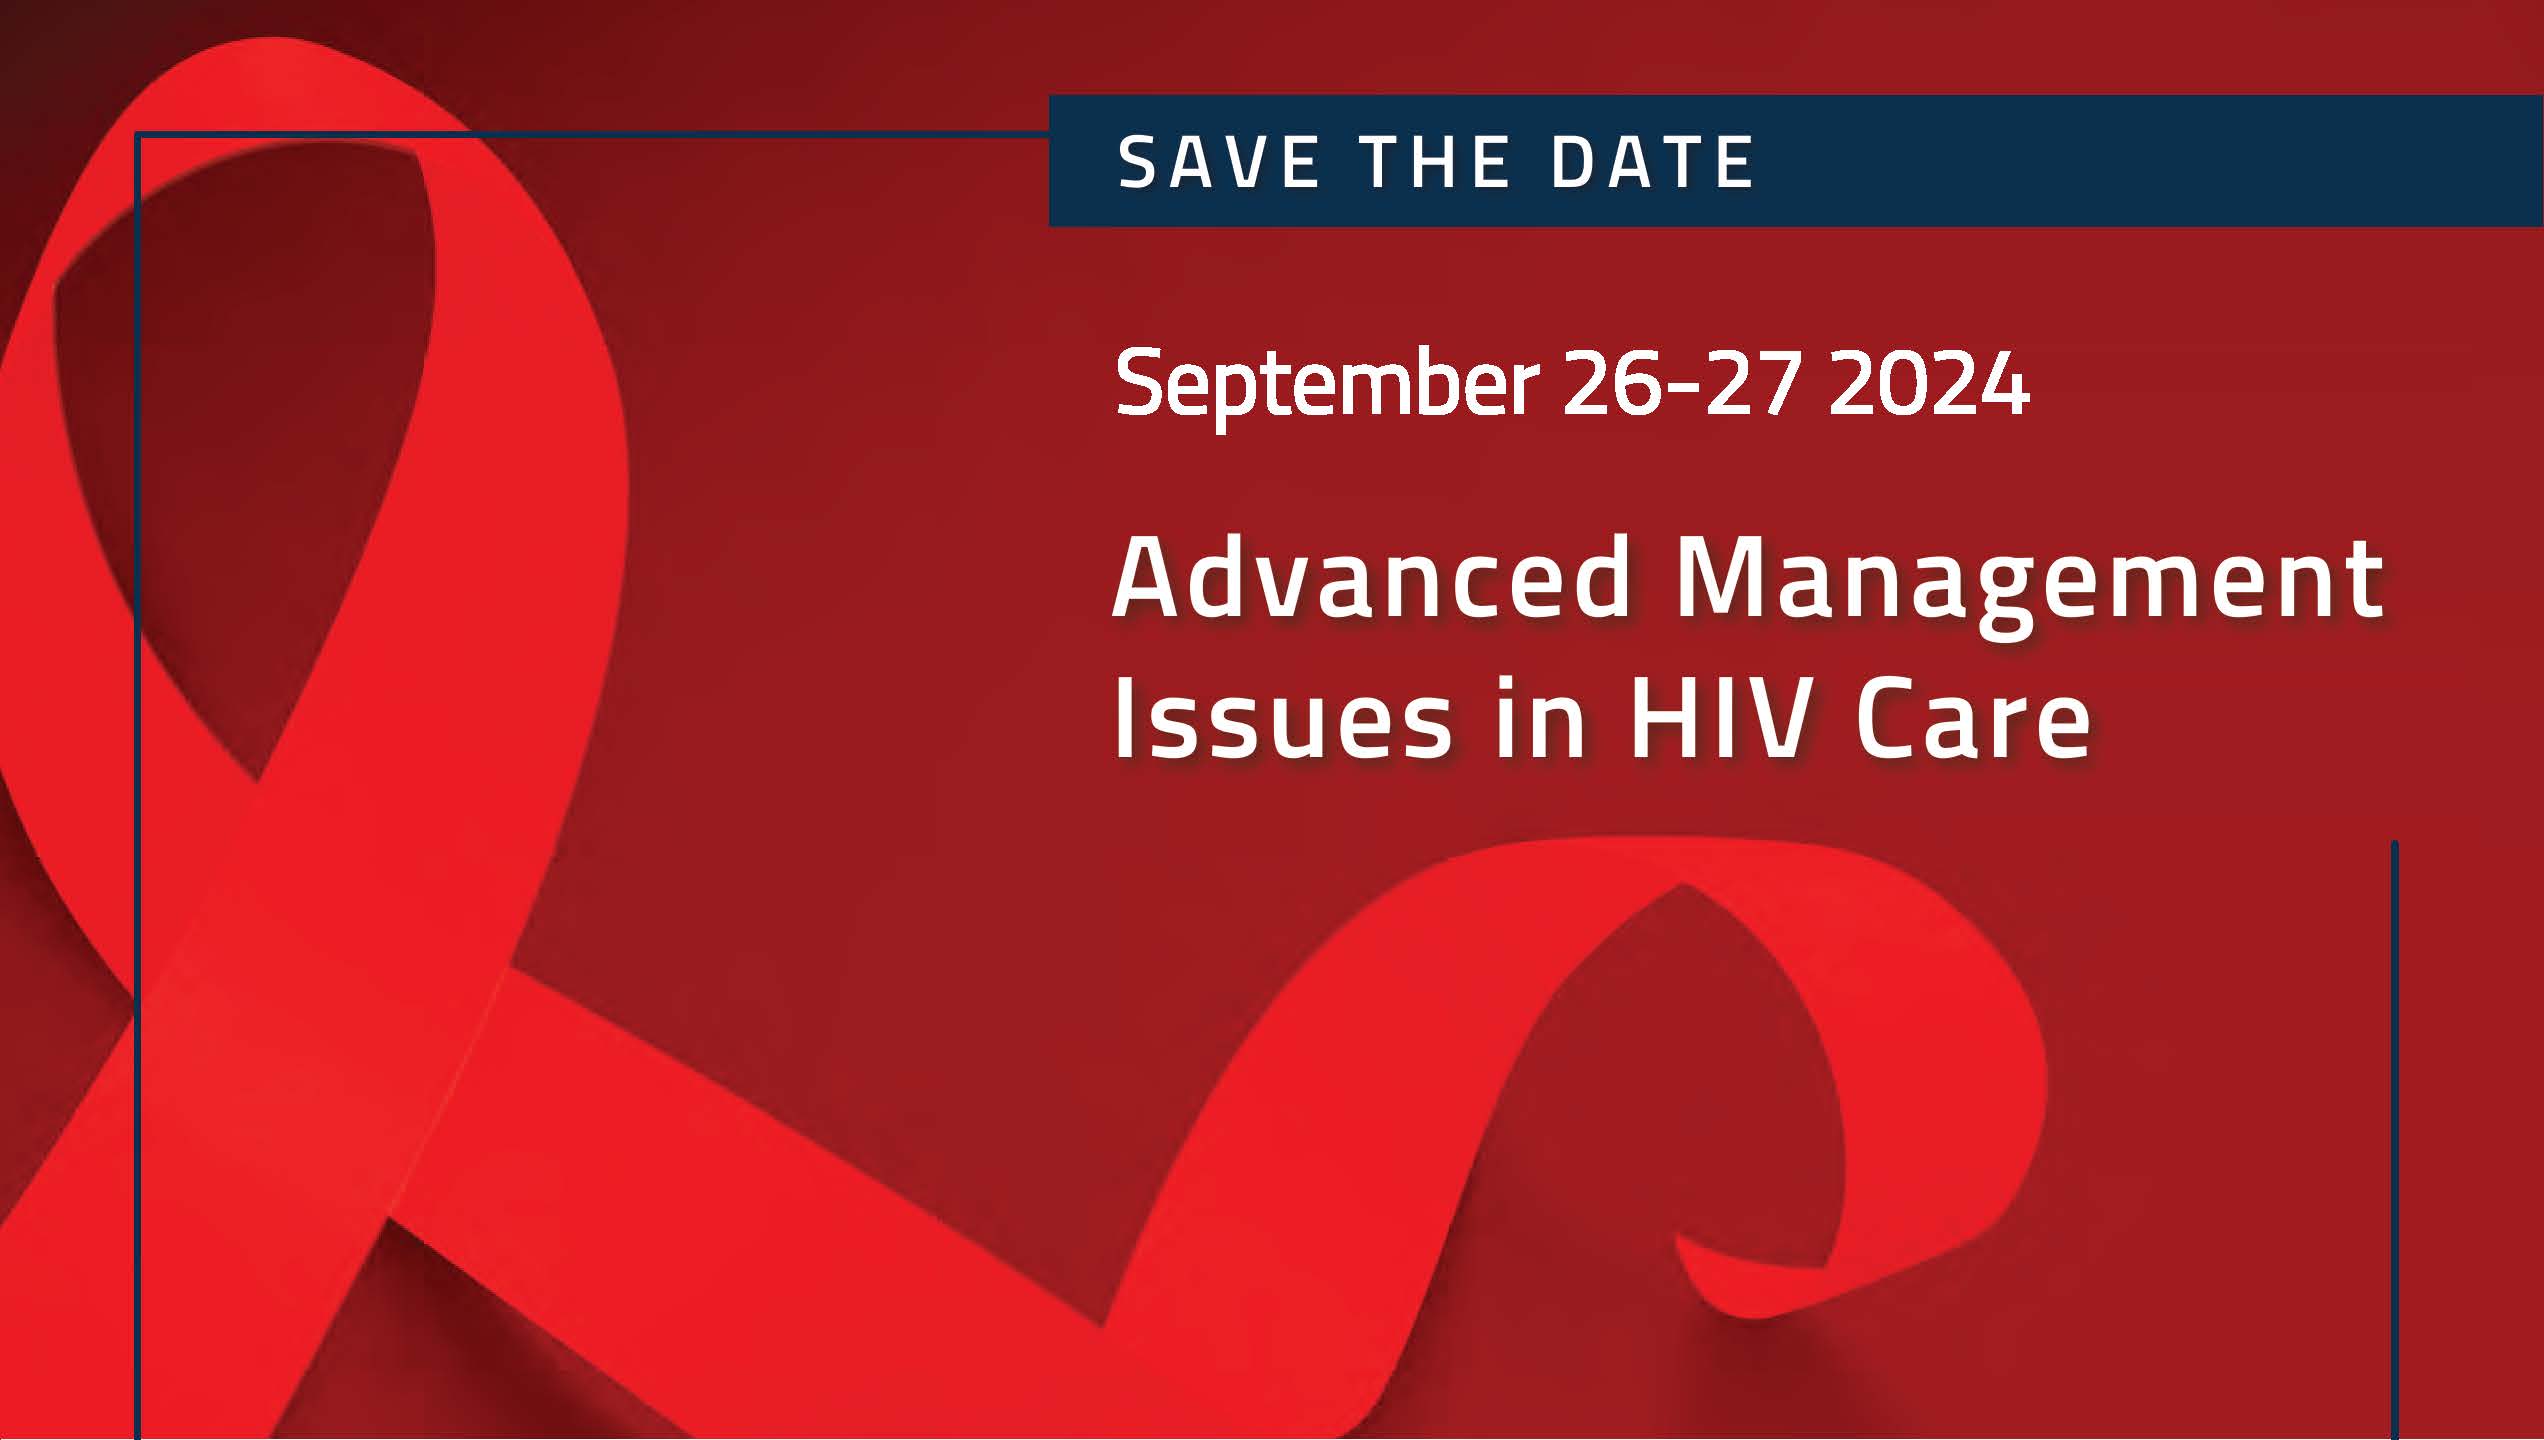 Advanced Management Issues in HIV Care Banner